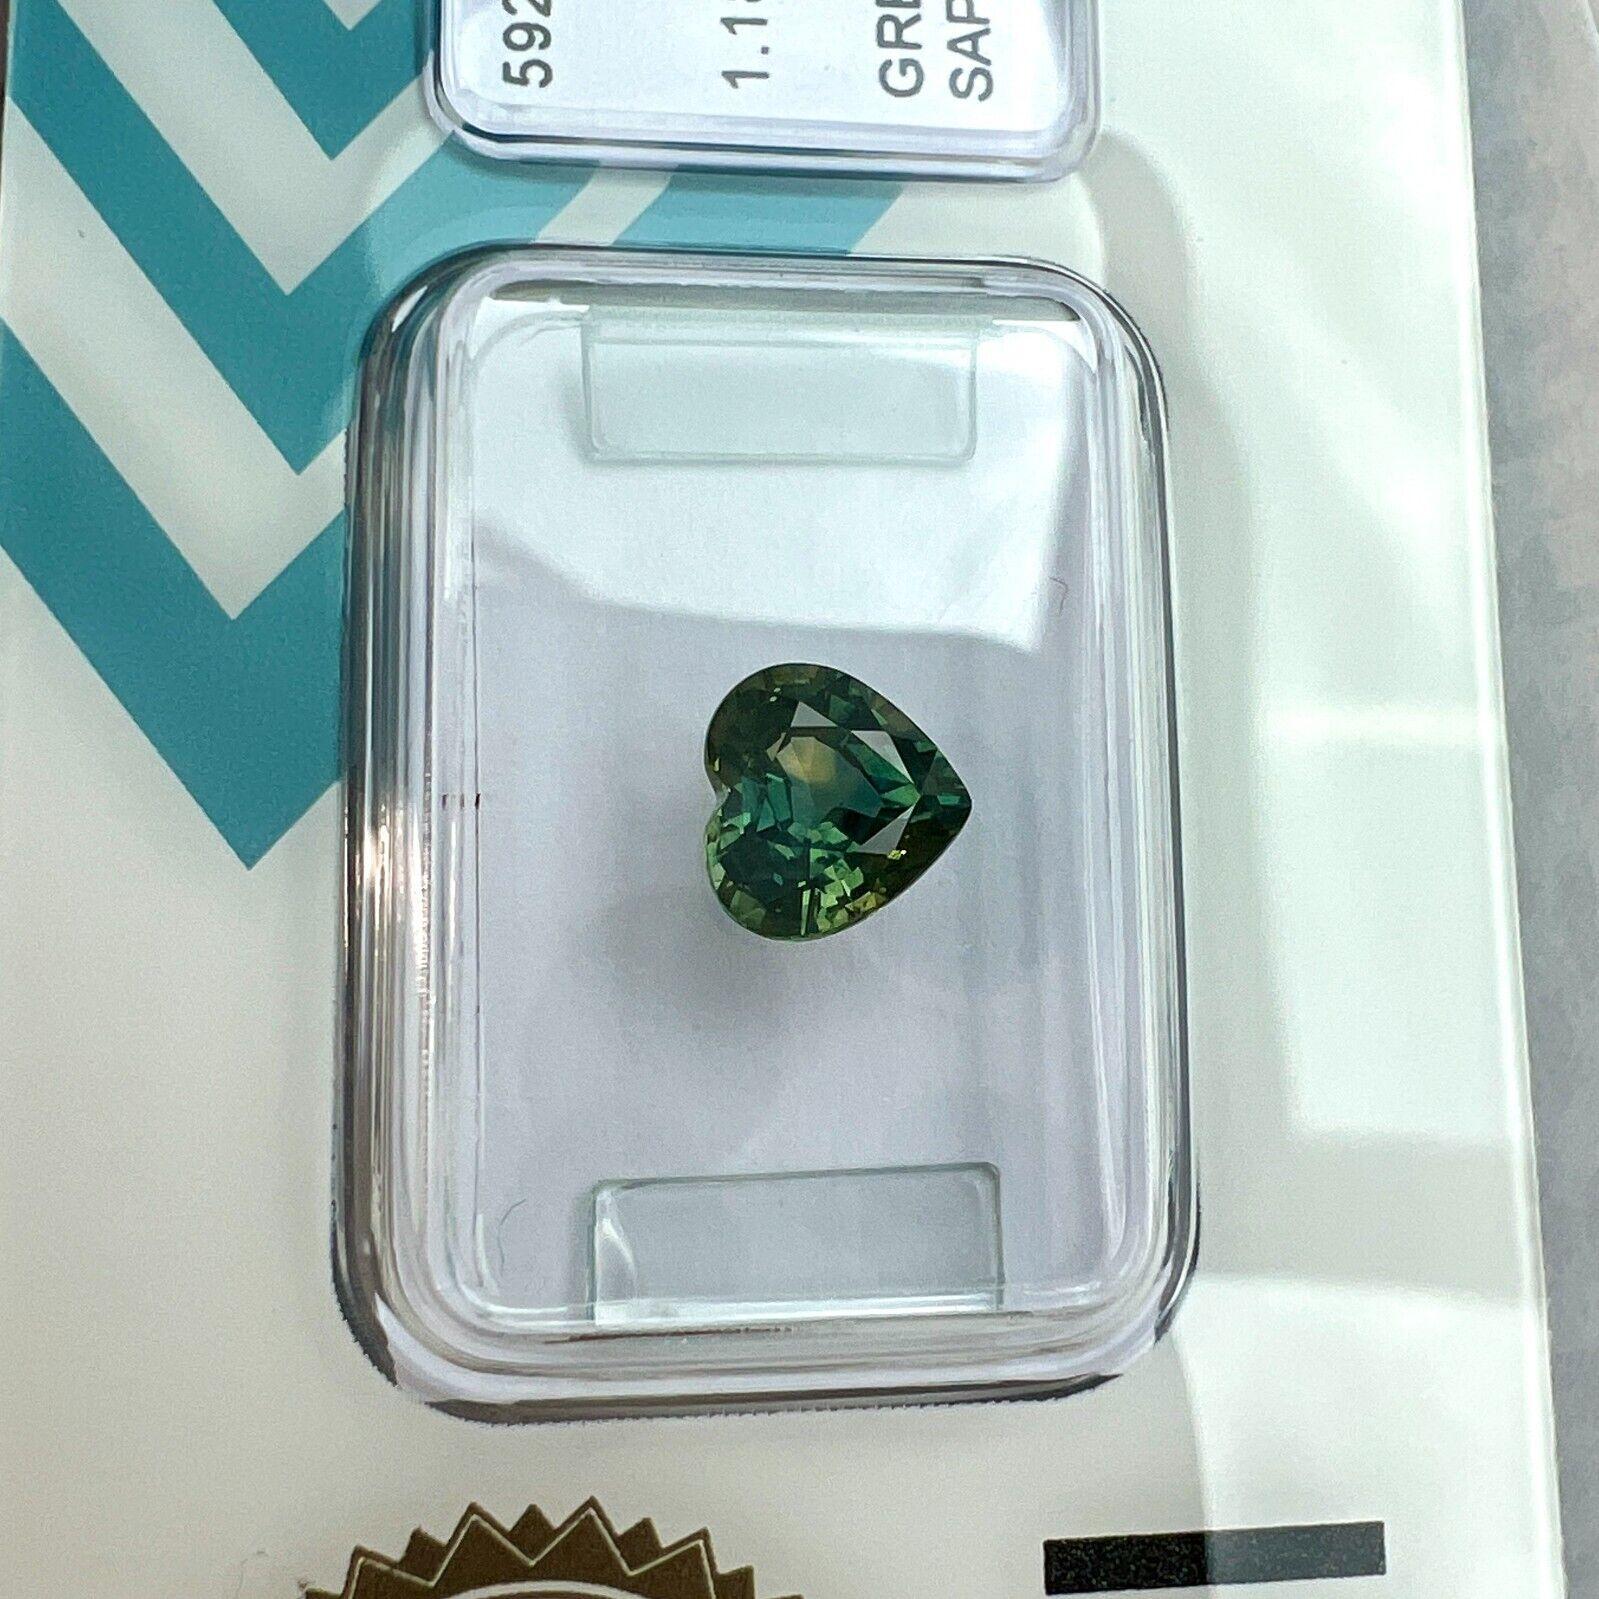 1.18ct Natural Bi Colour Sapphire Yellow Blue Green No Heat Heart IGI Certified

Natural Untreated Bi Colour Yellow Blue Green Sapphire.
1.18 Carat with a unique yellow blue-green bi-colour effect, very rare and stunning to see. With an excellent